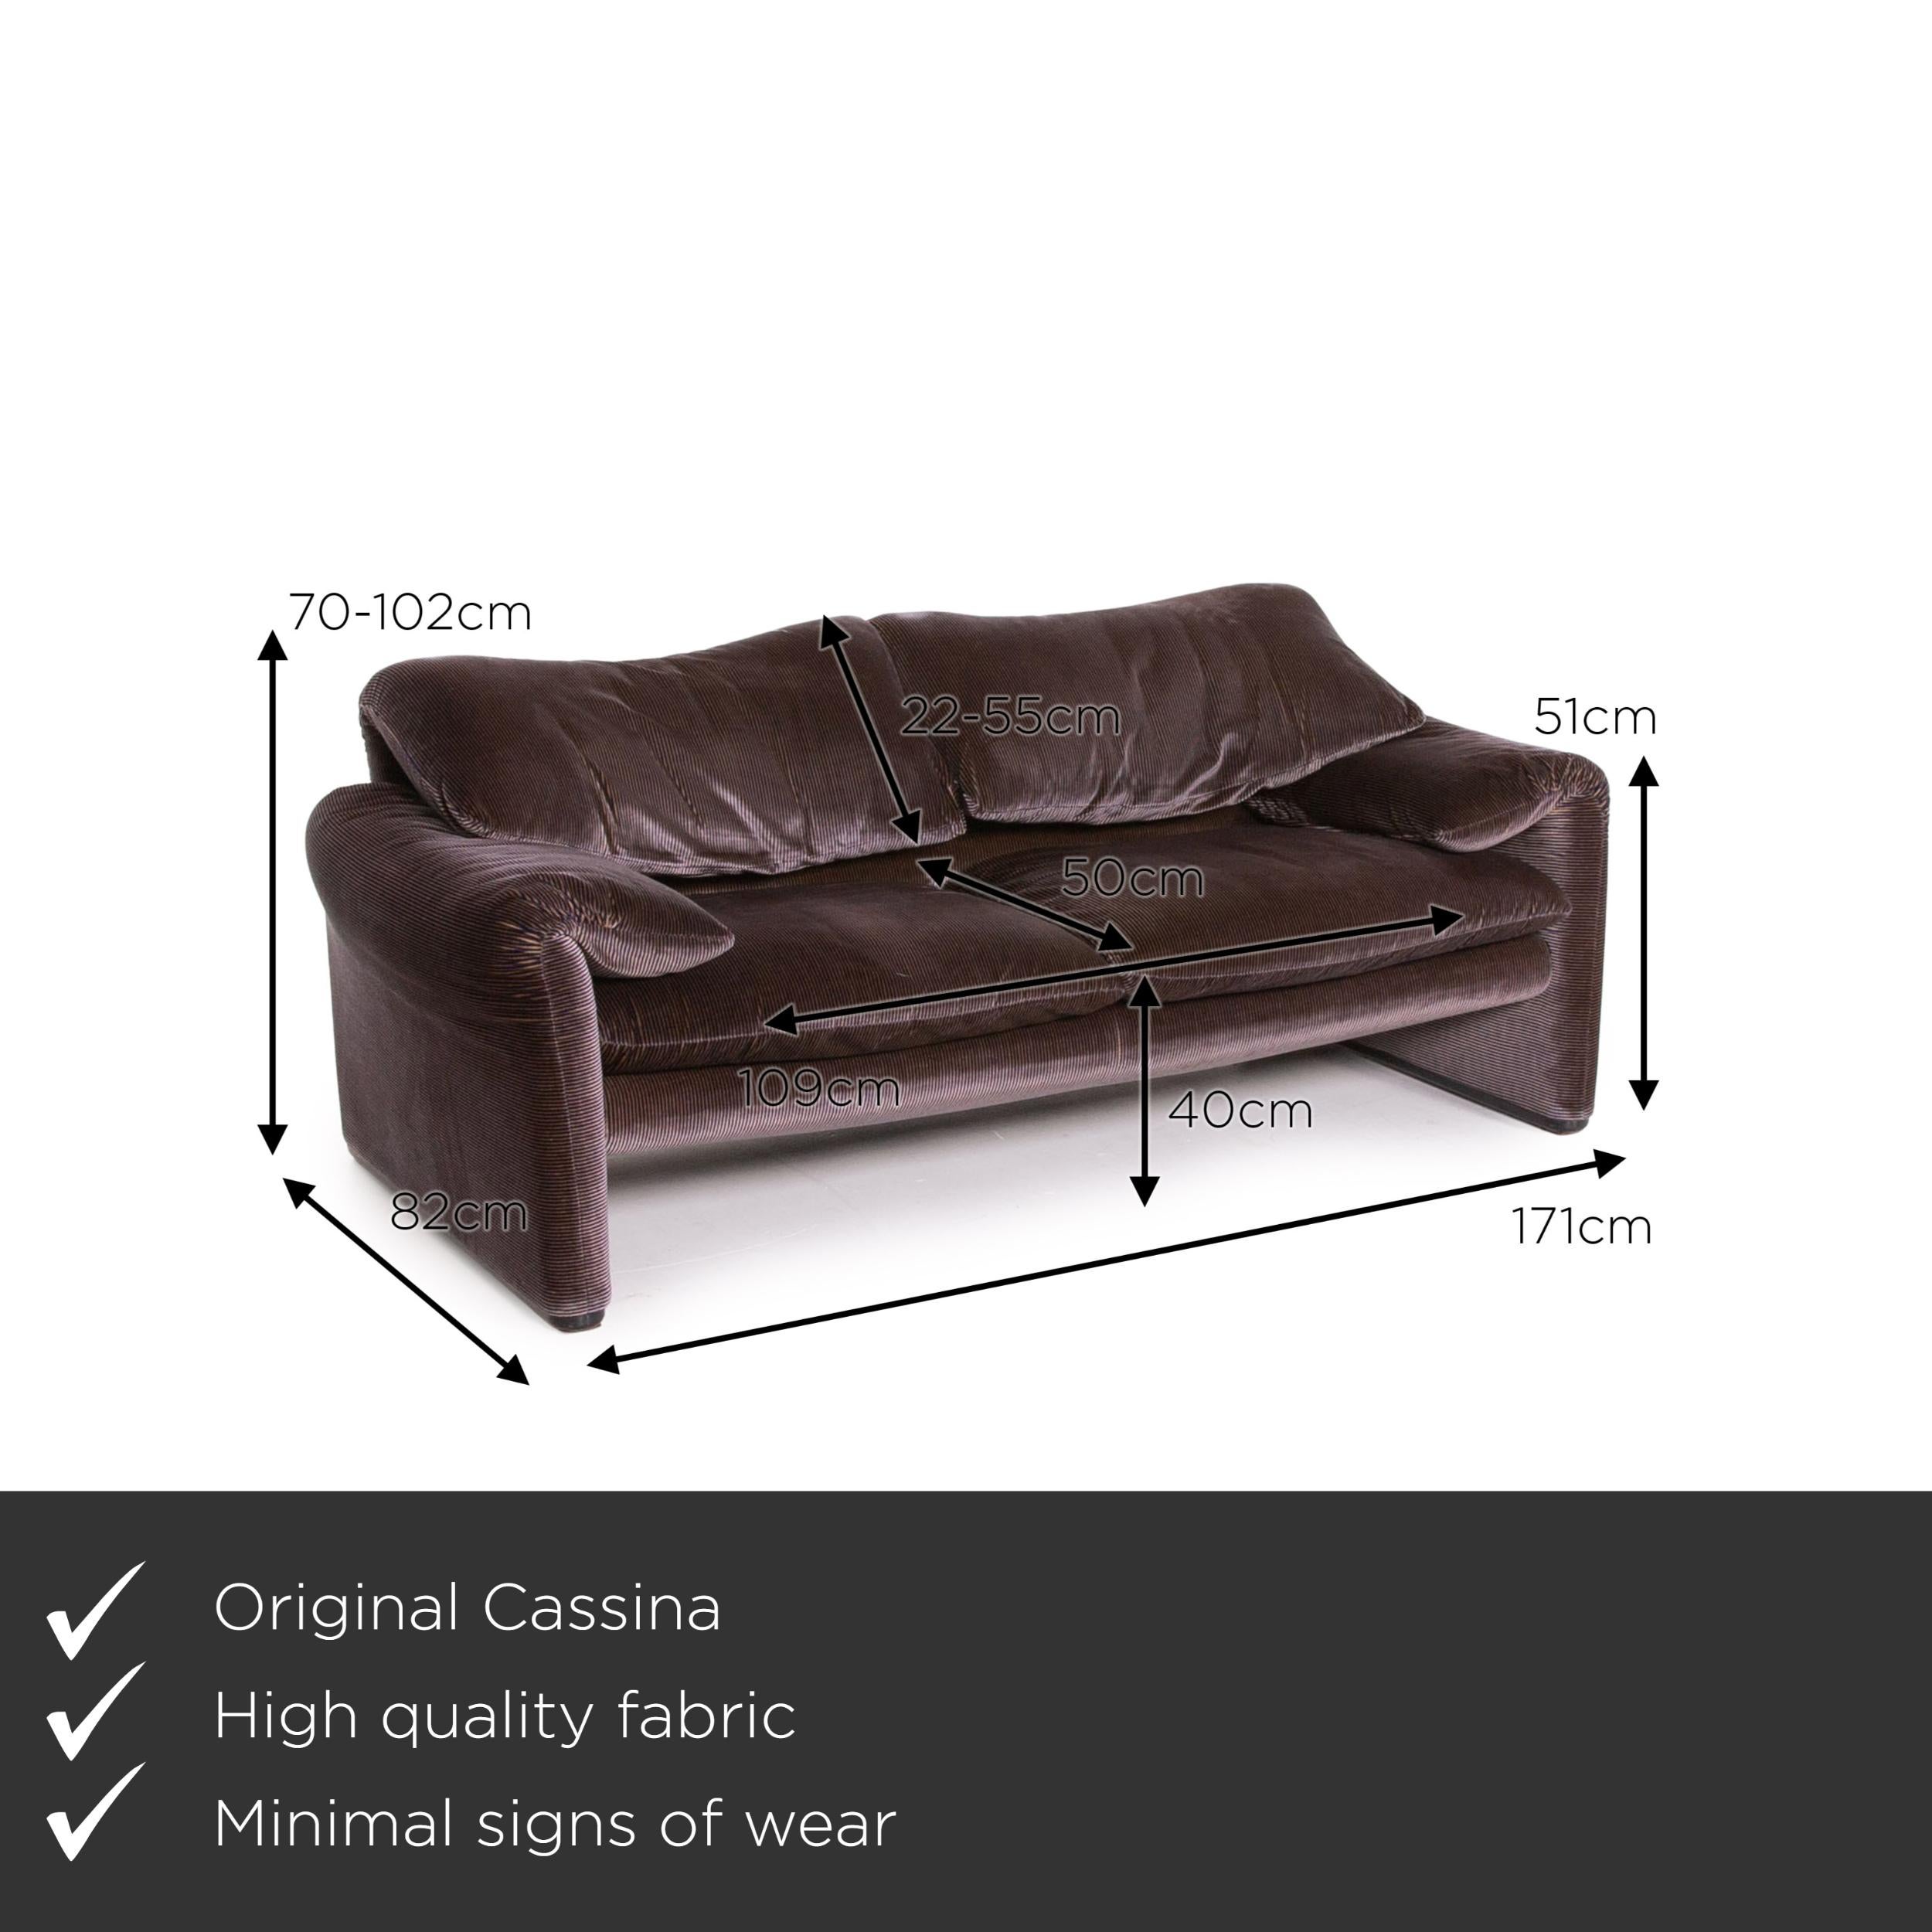 We present to you a Cassina Maralunga fabric sofa set purple aubergine 1x three-seat 1x armchair.

Product measurements in centimeters:

Depth 82
Width 171
Height 70
Seat height 40
Rest height 51
Seat depth 50
Seat width 109
Back height